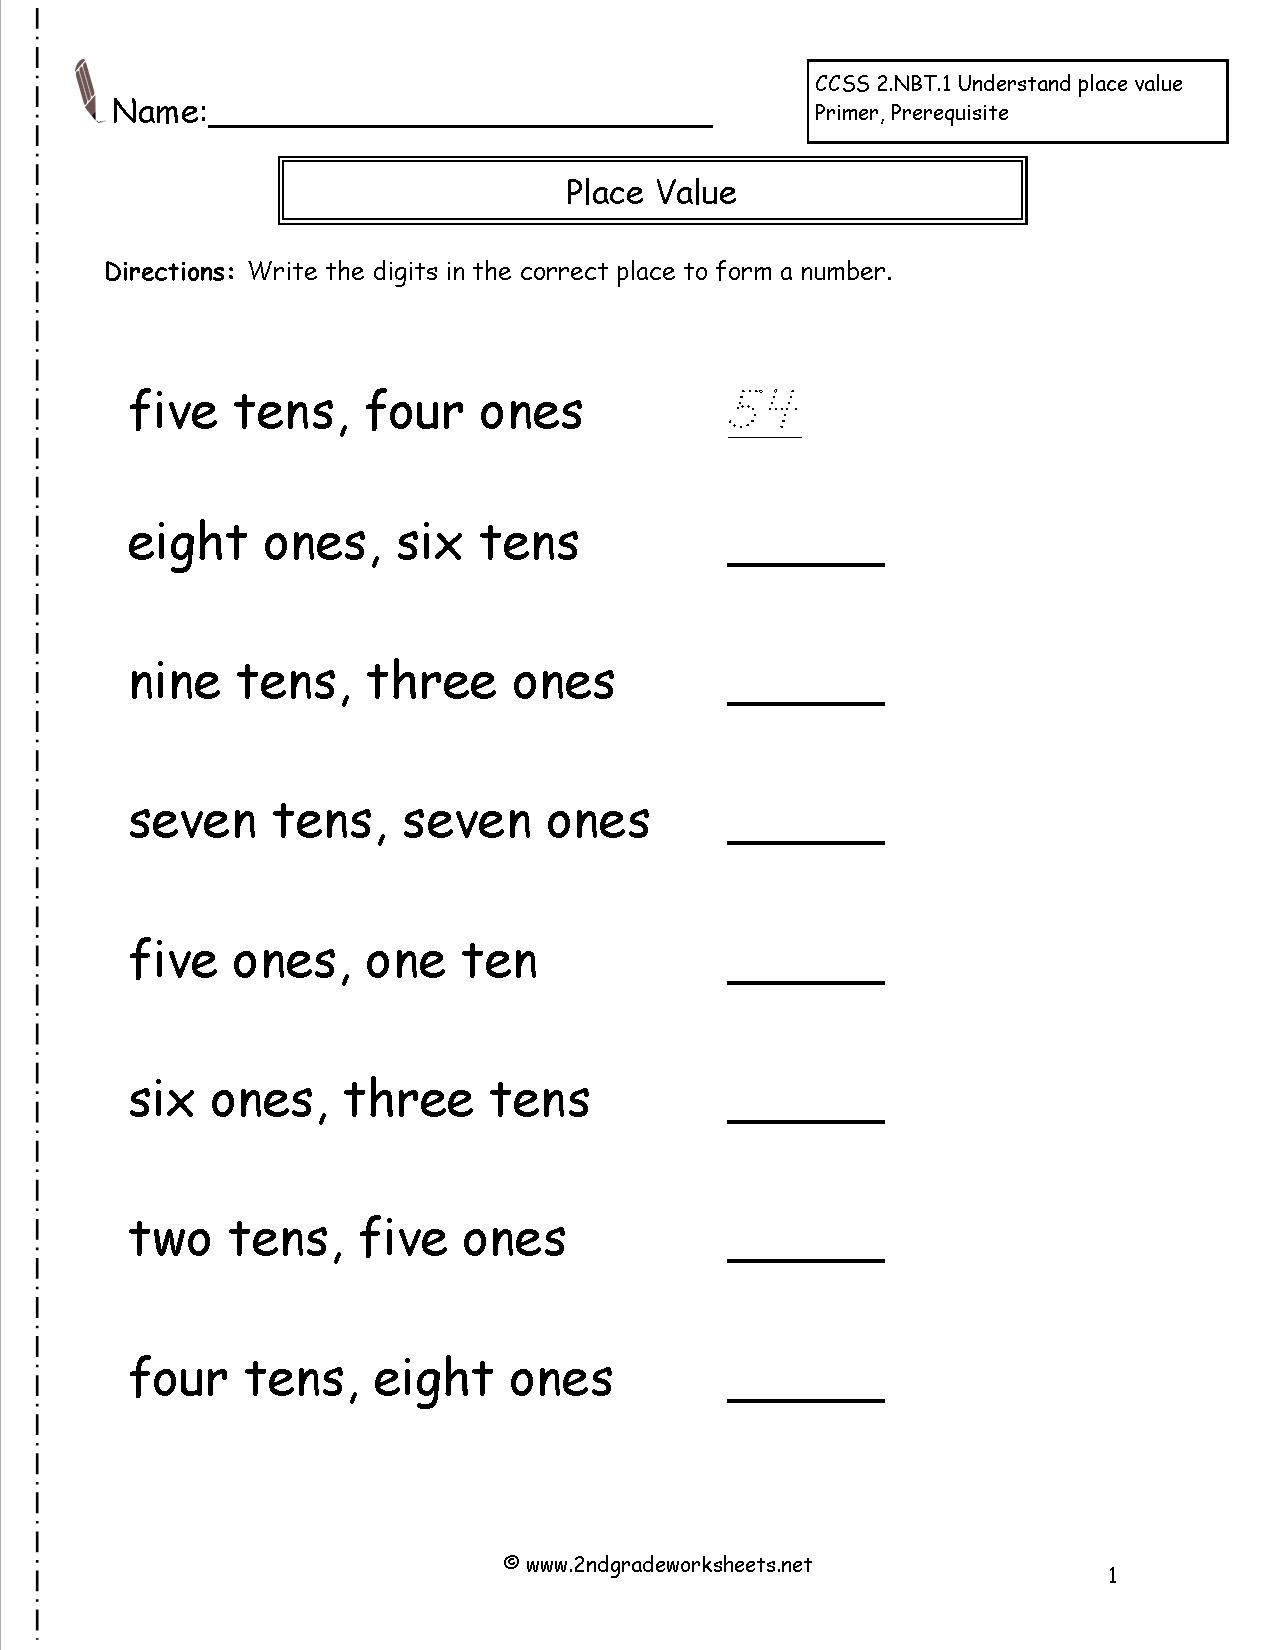 2nd-grade-place-value-worksheets-tens-and-ones-tens-ones-grouping